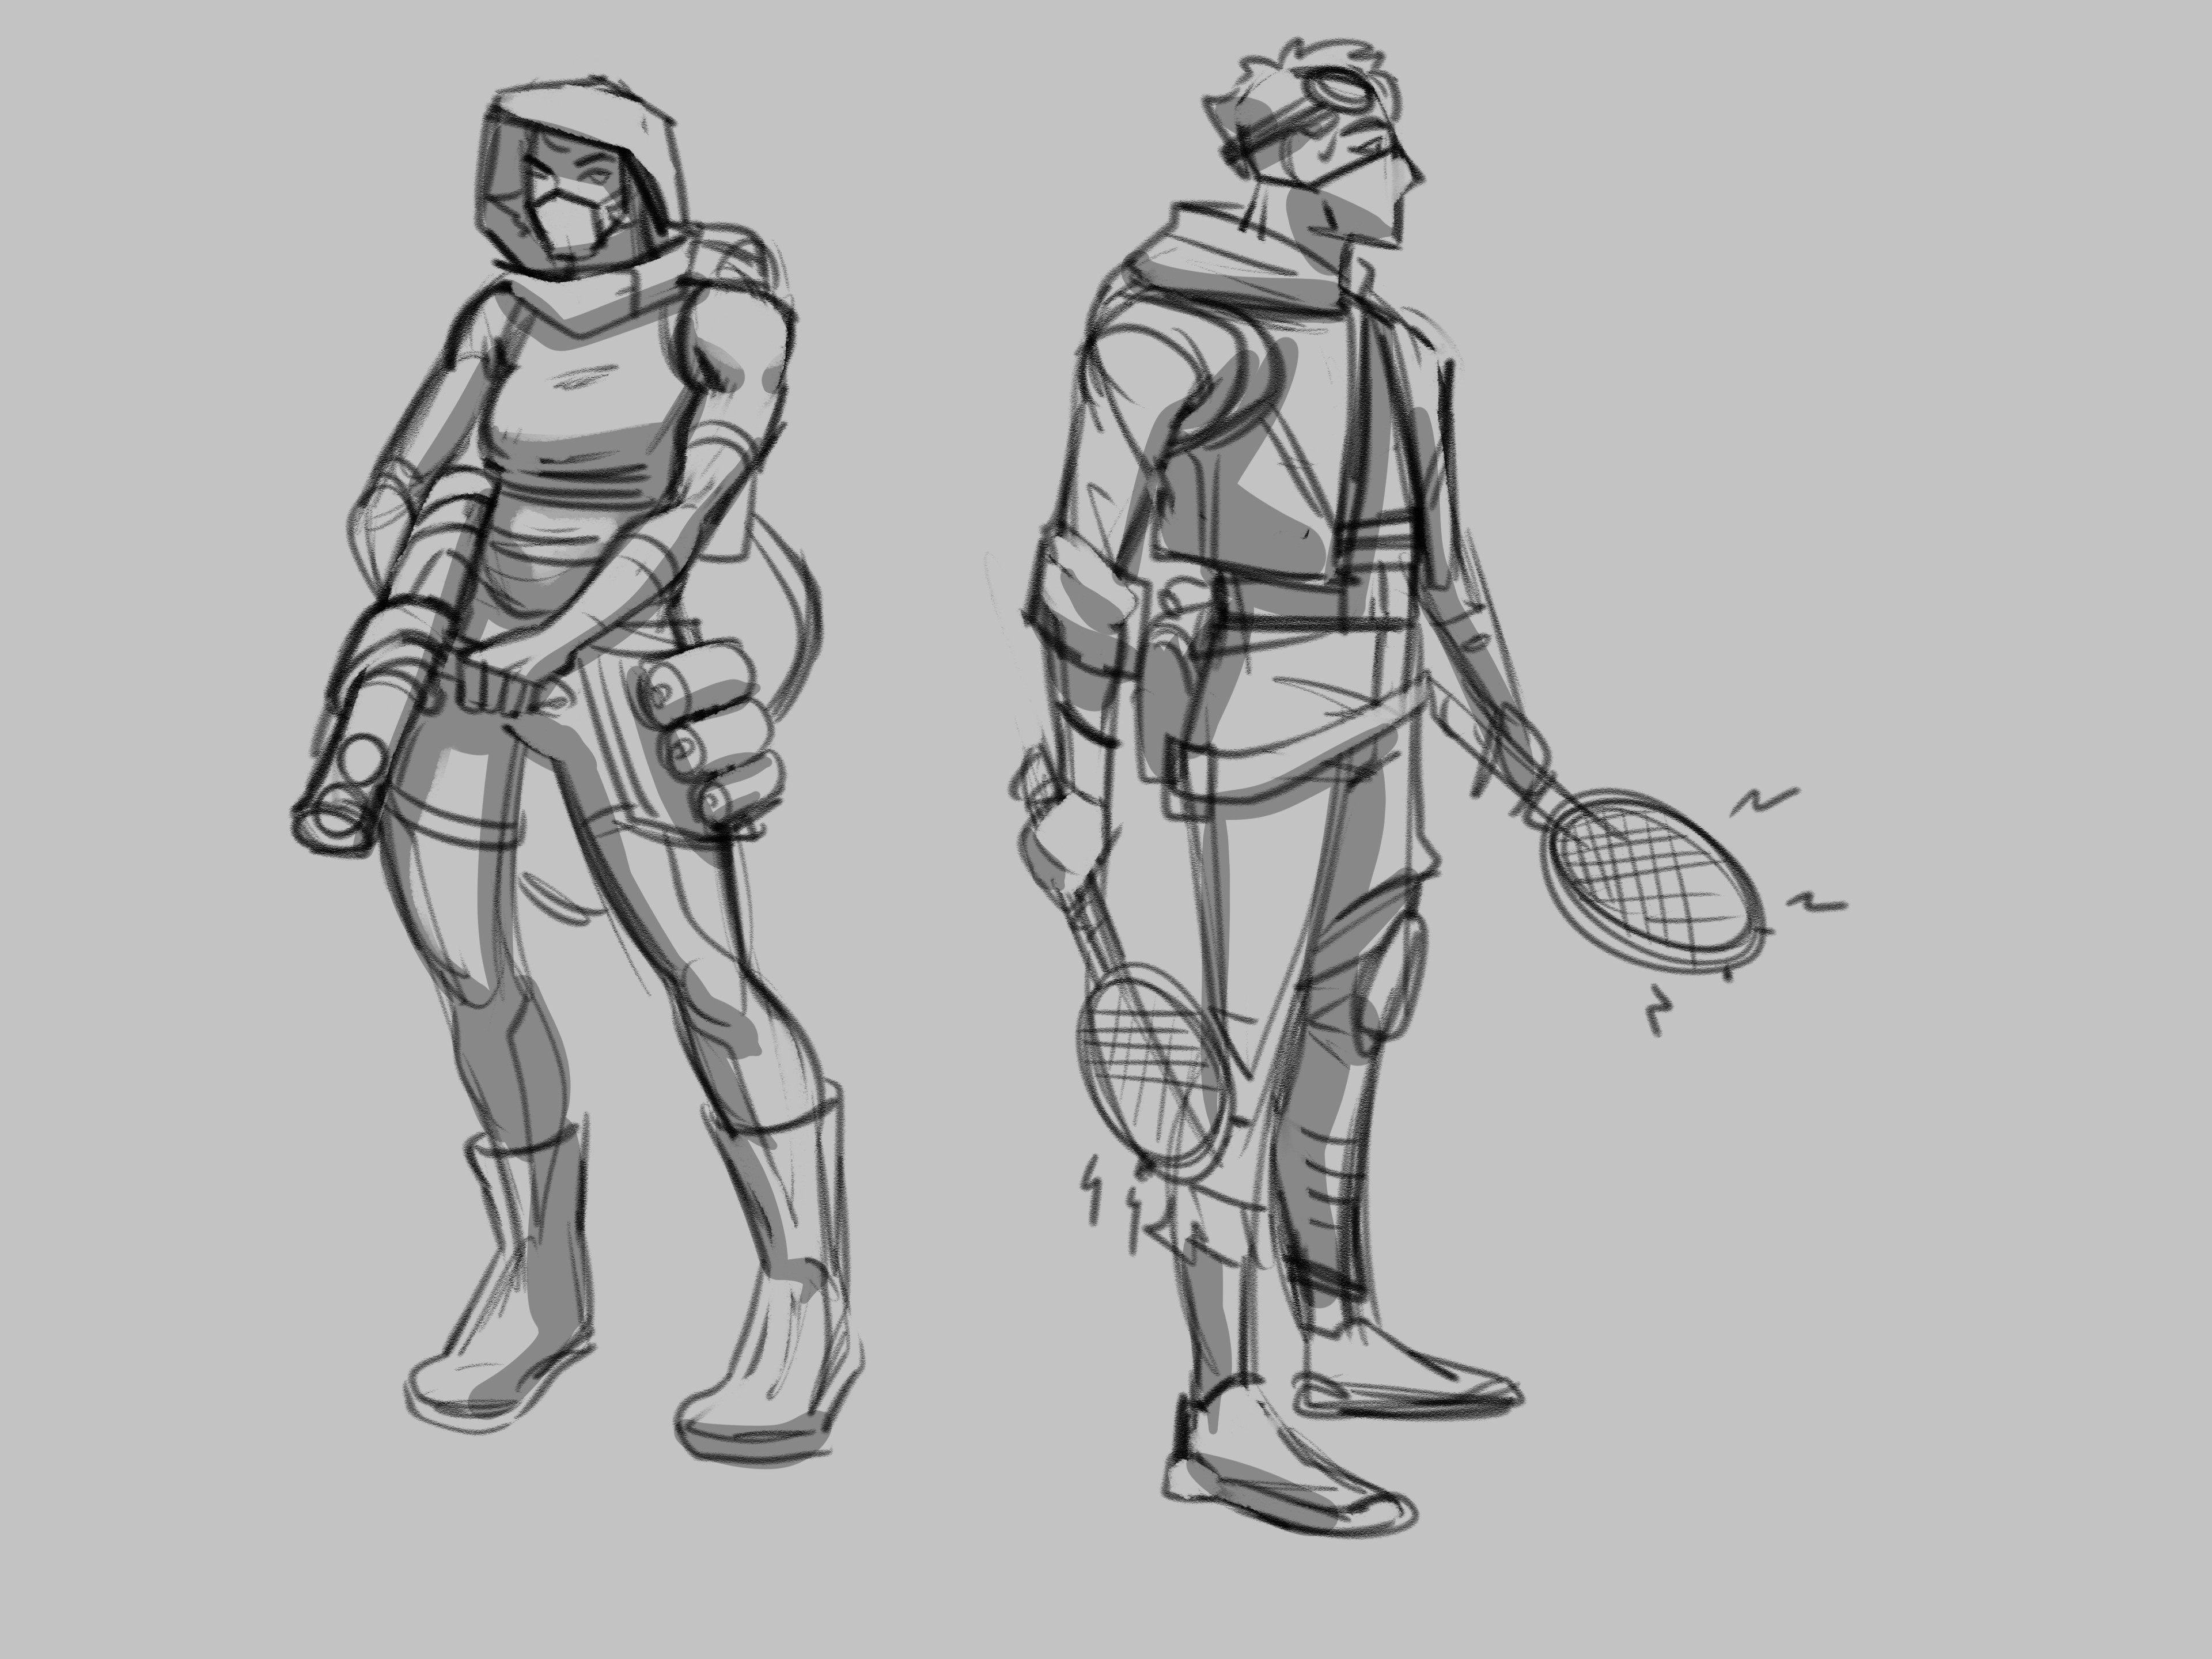 Some older characters iterations. The weapons were “too normal” for our taste.